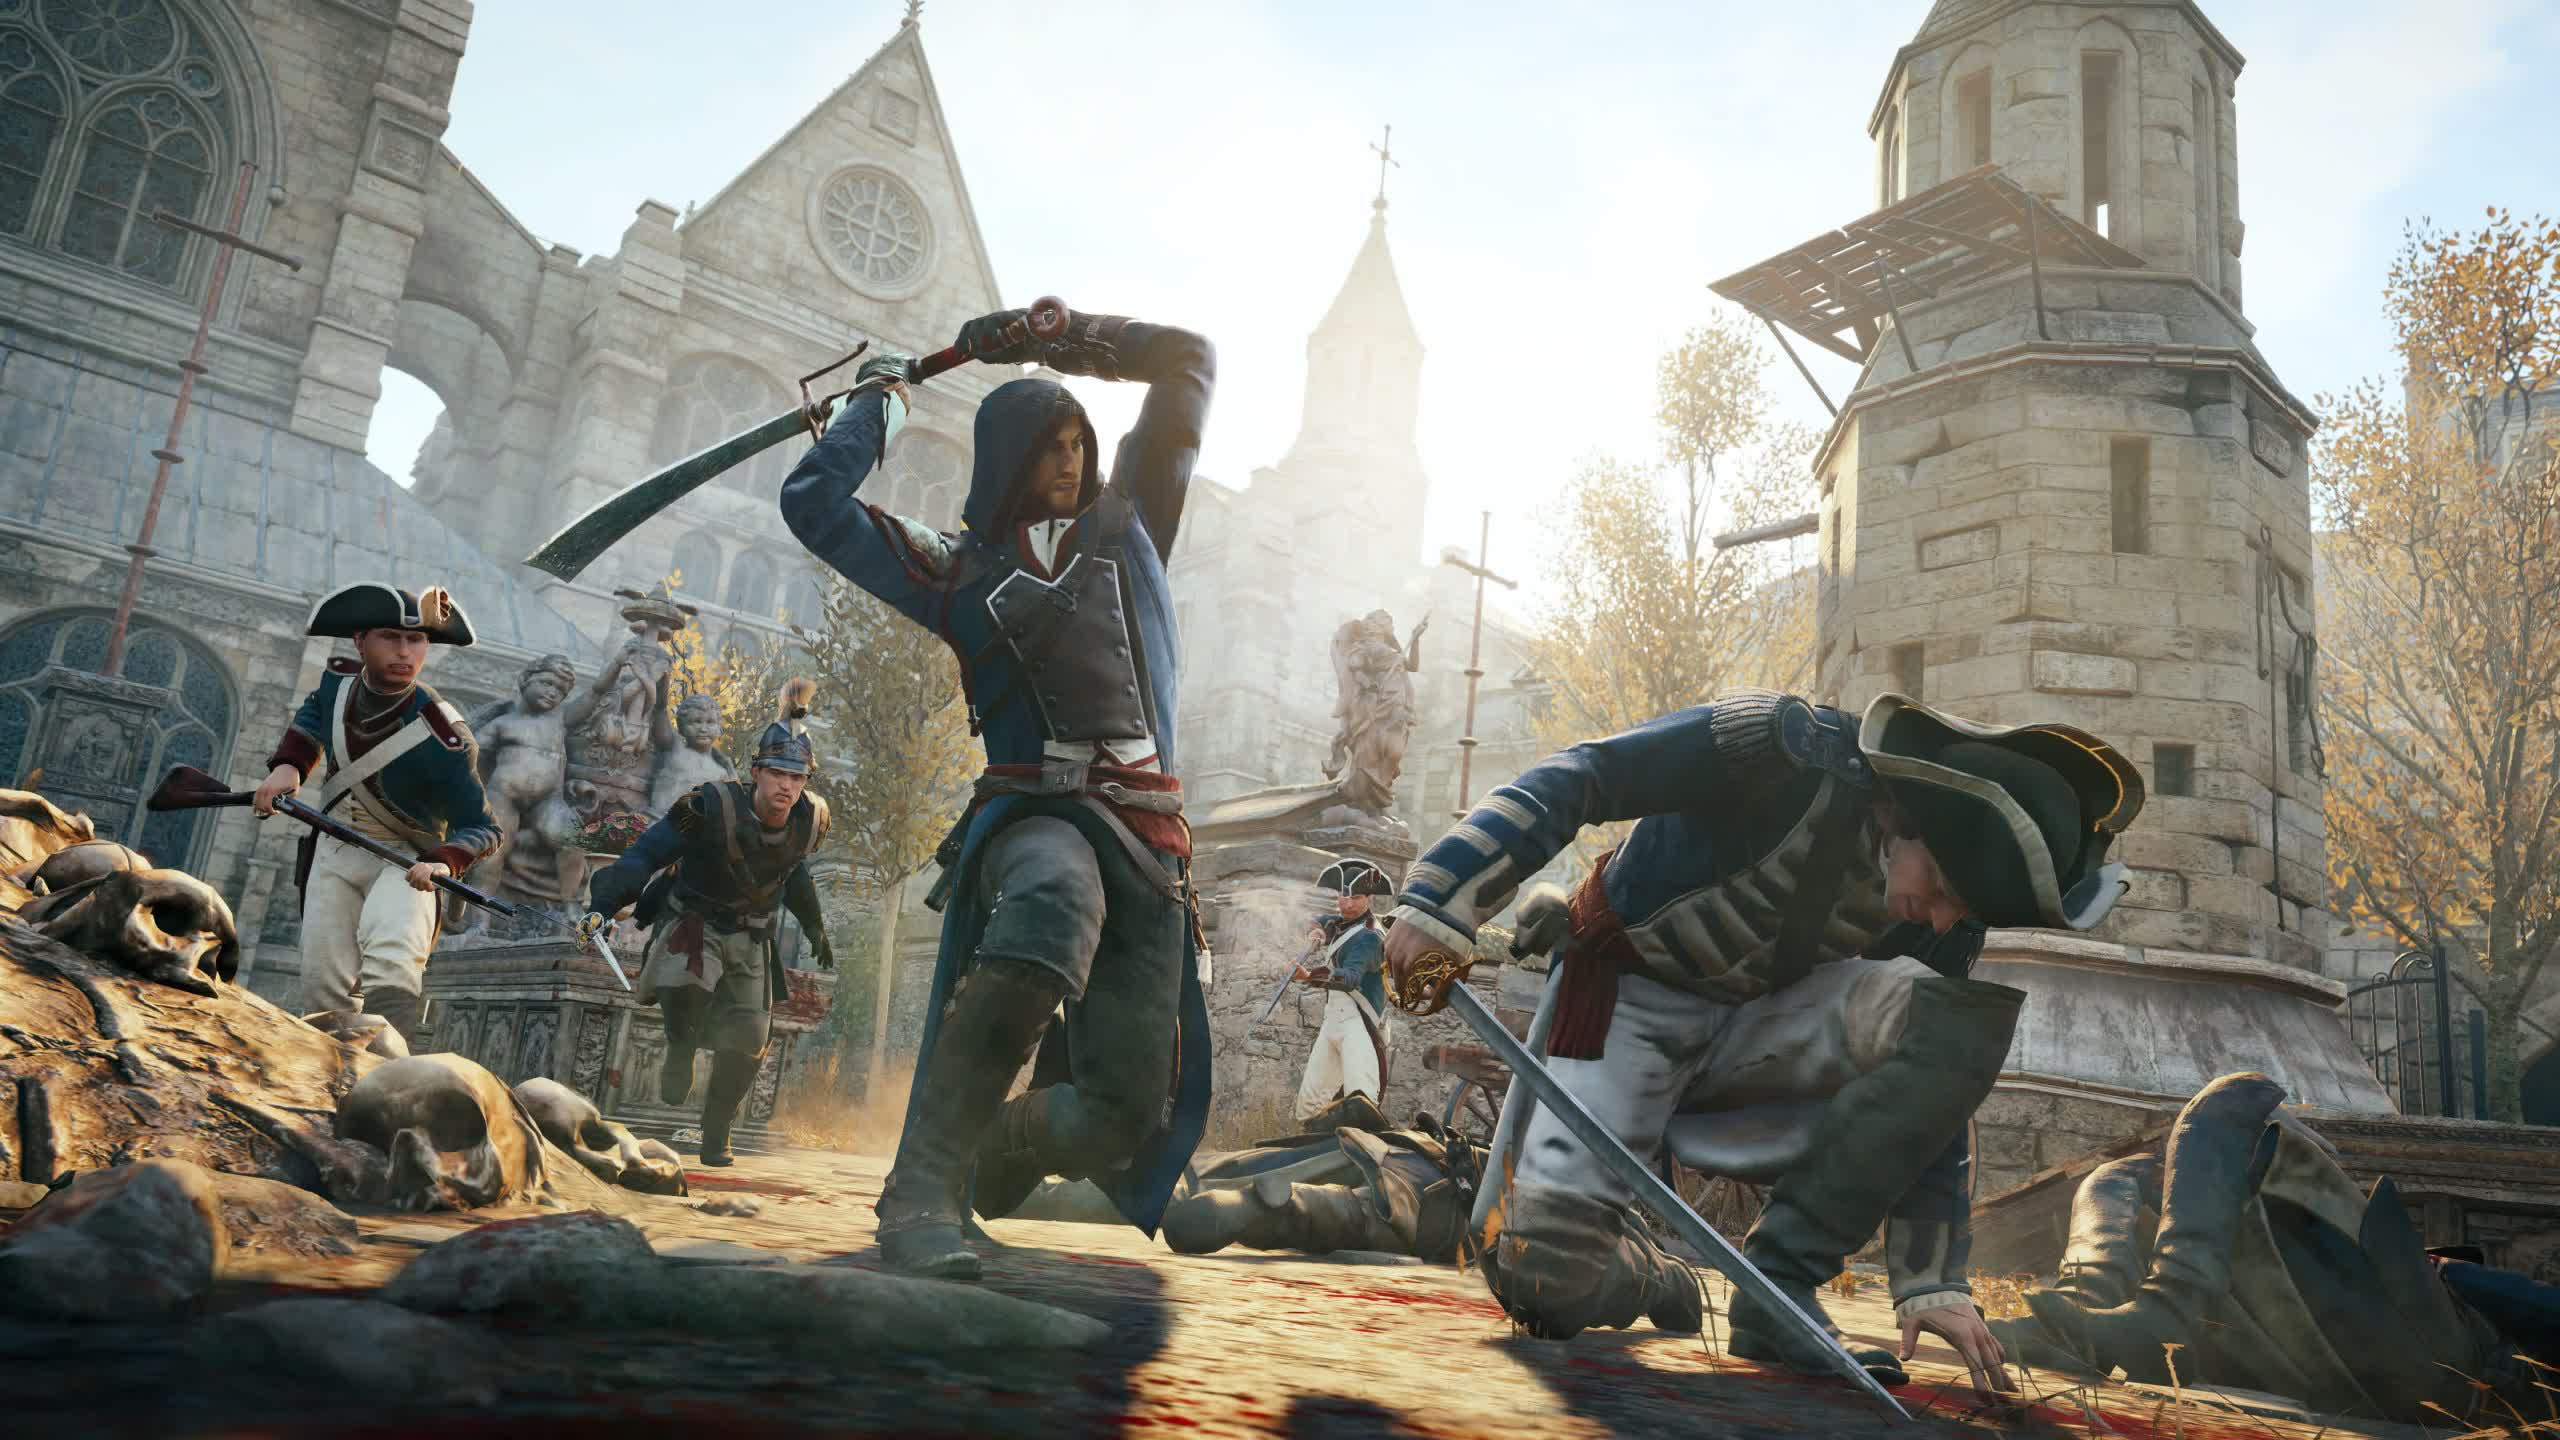 Investment firms could be eyeing Ubisoft for a takeover